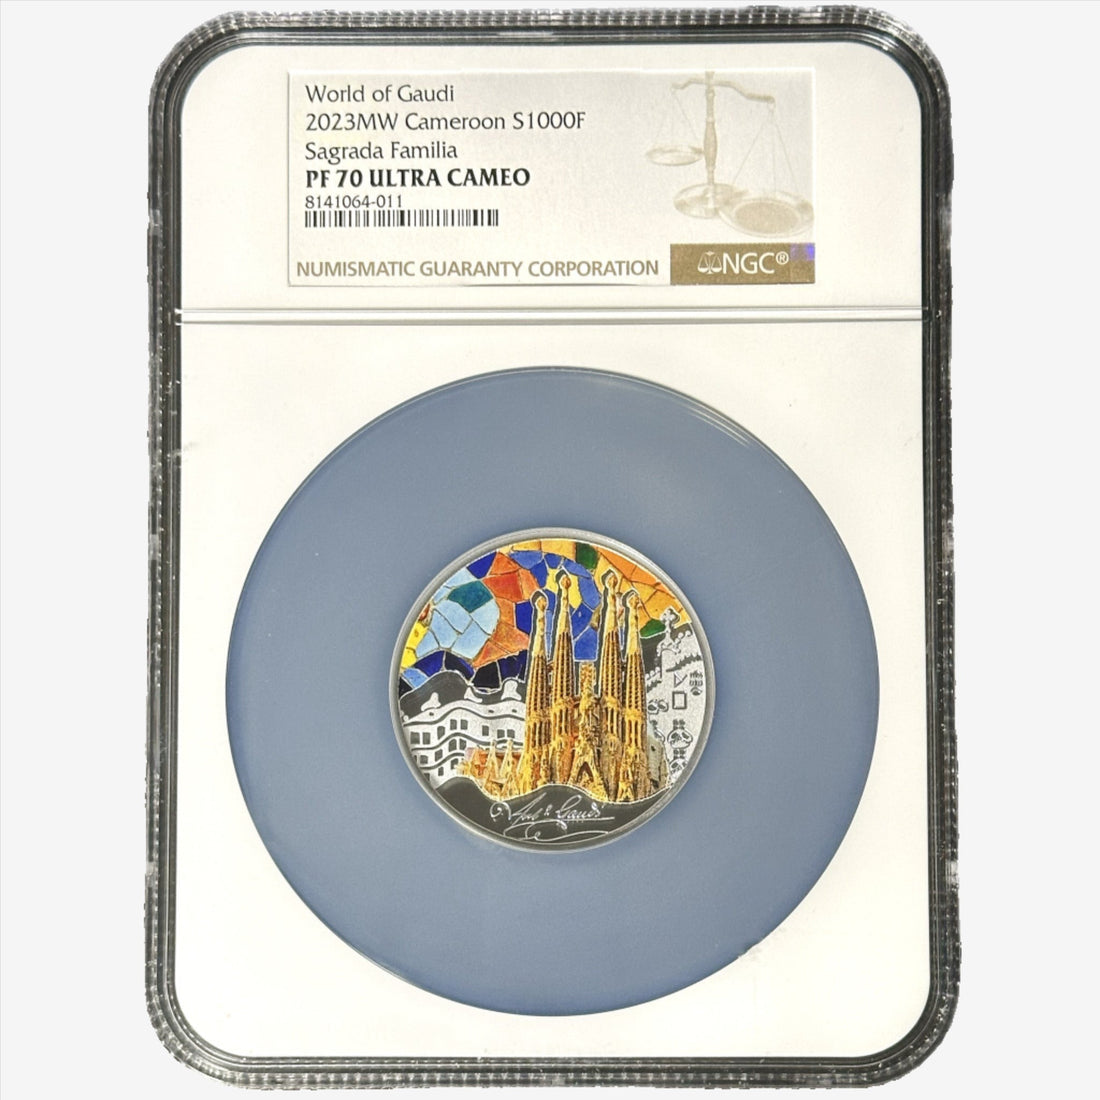 2023 Cameroon THE COLORFUL WORLD OF GAUDI 1 oz Silver Coin PF 70 - OZB